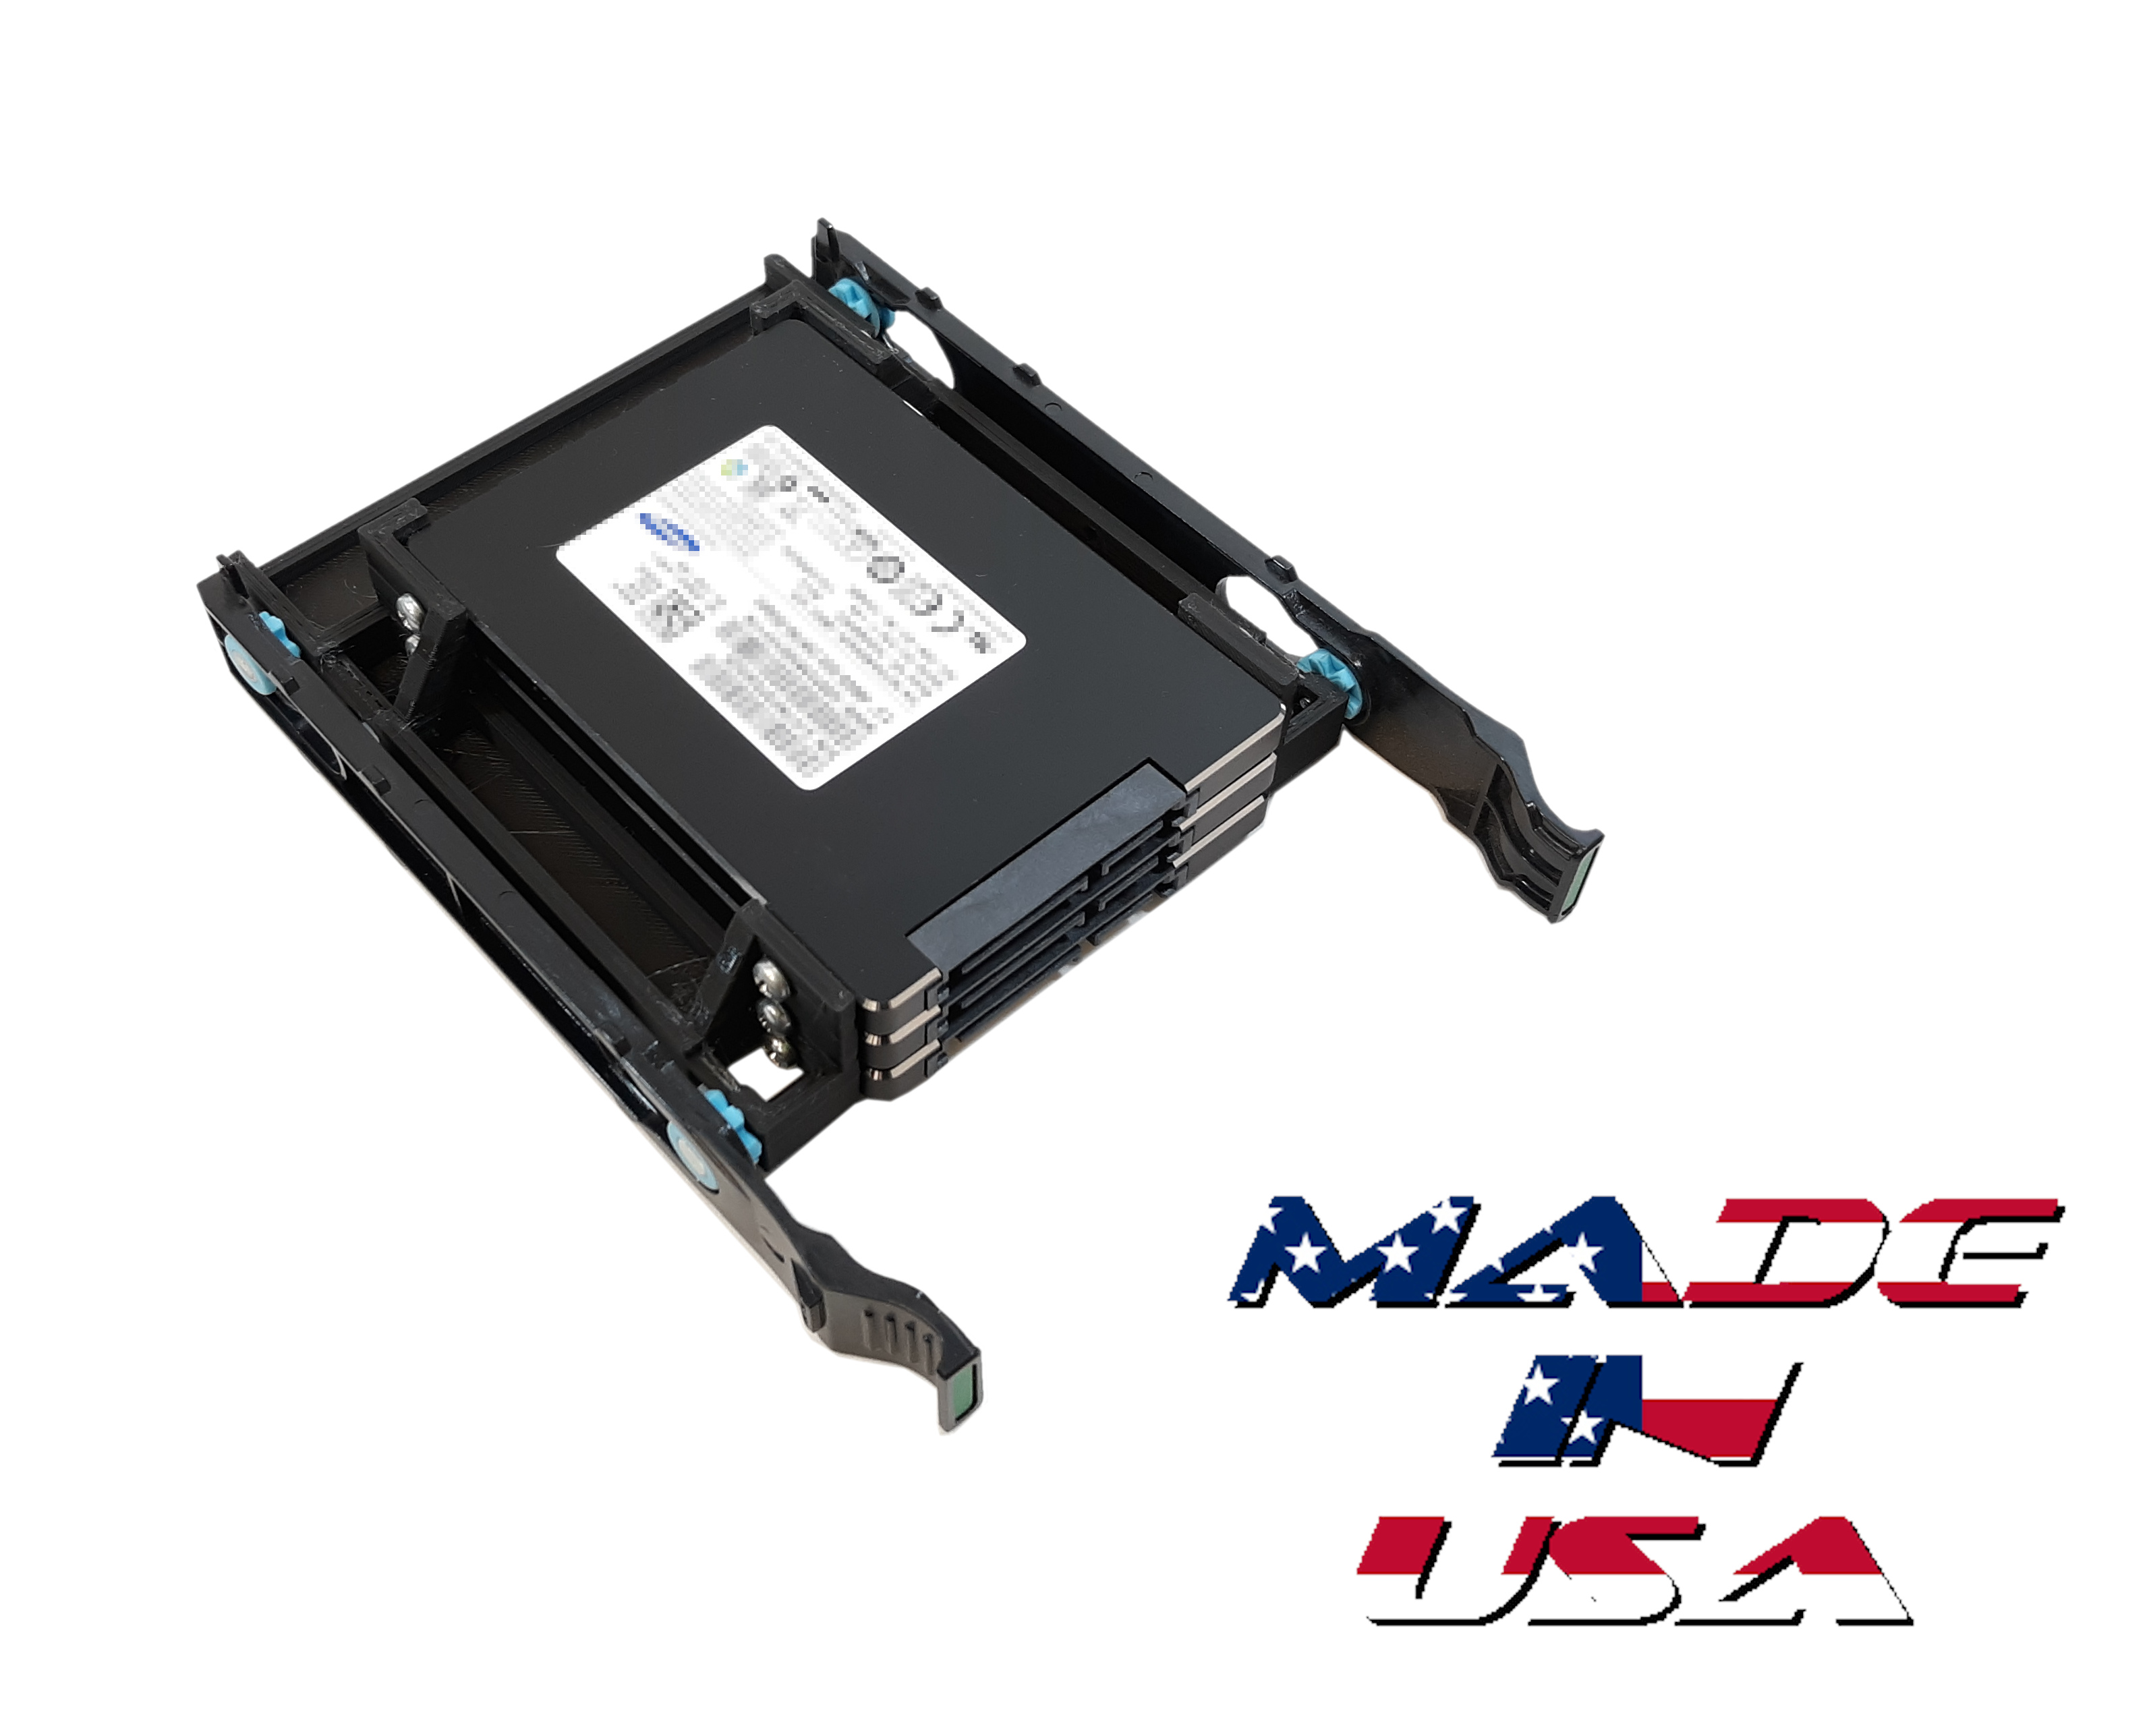 Dual SSD M.2 to SATA 2.5 Adapter Card / Drive Caddy Tray Sled mount